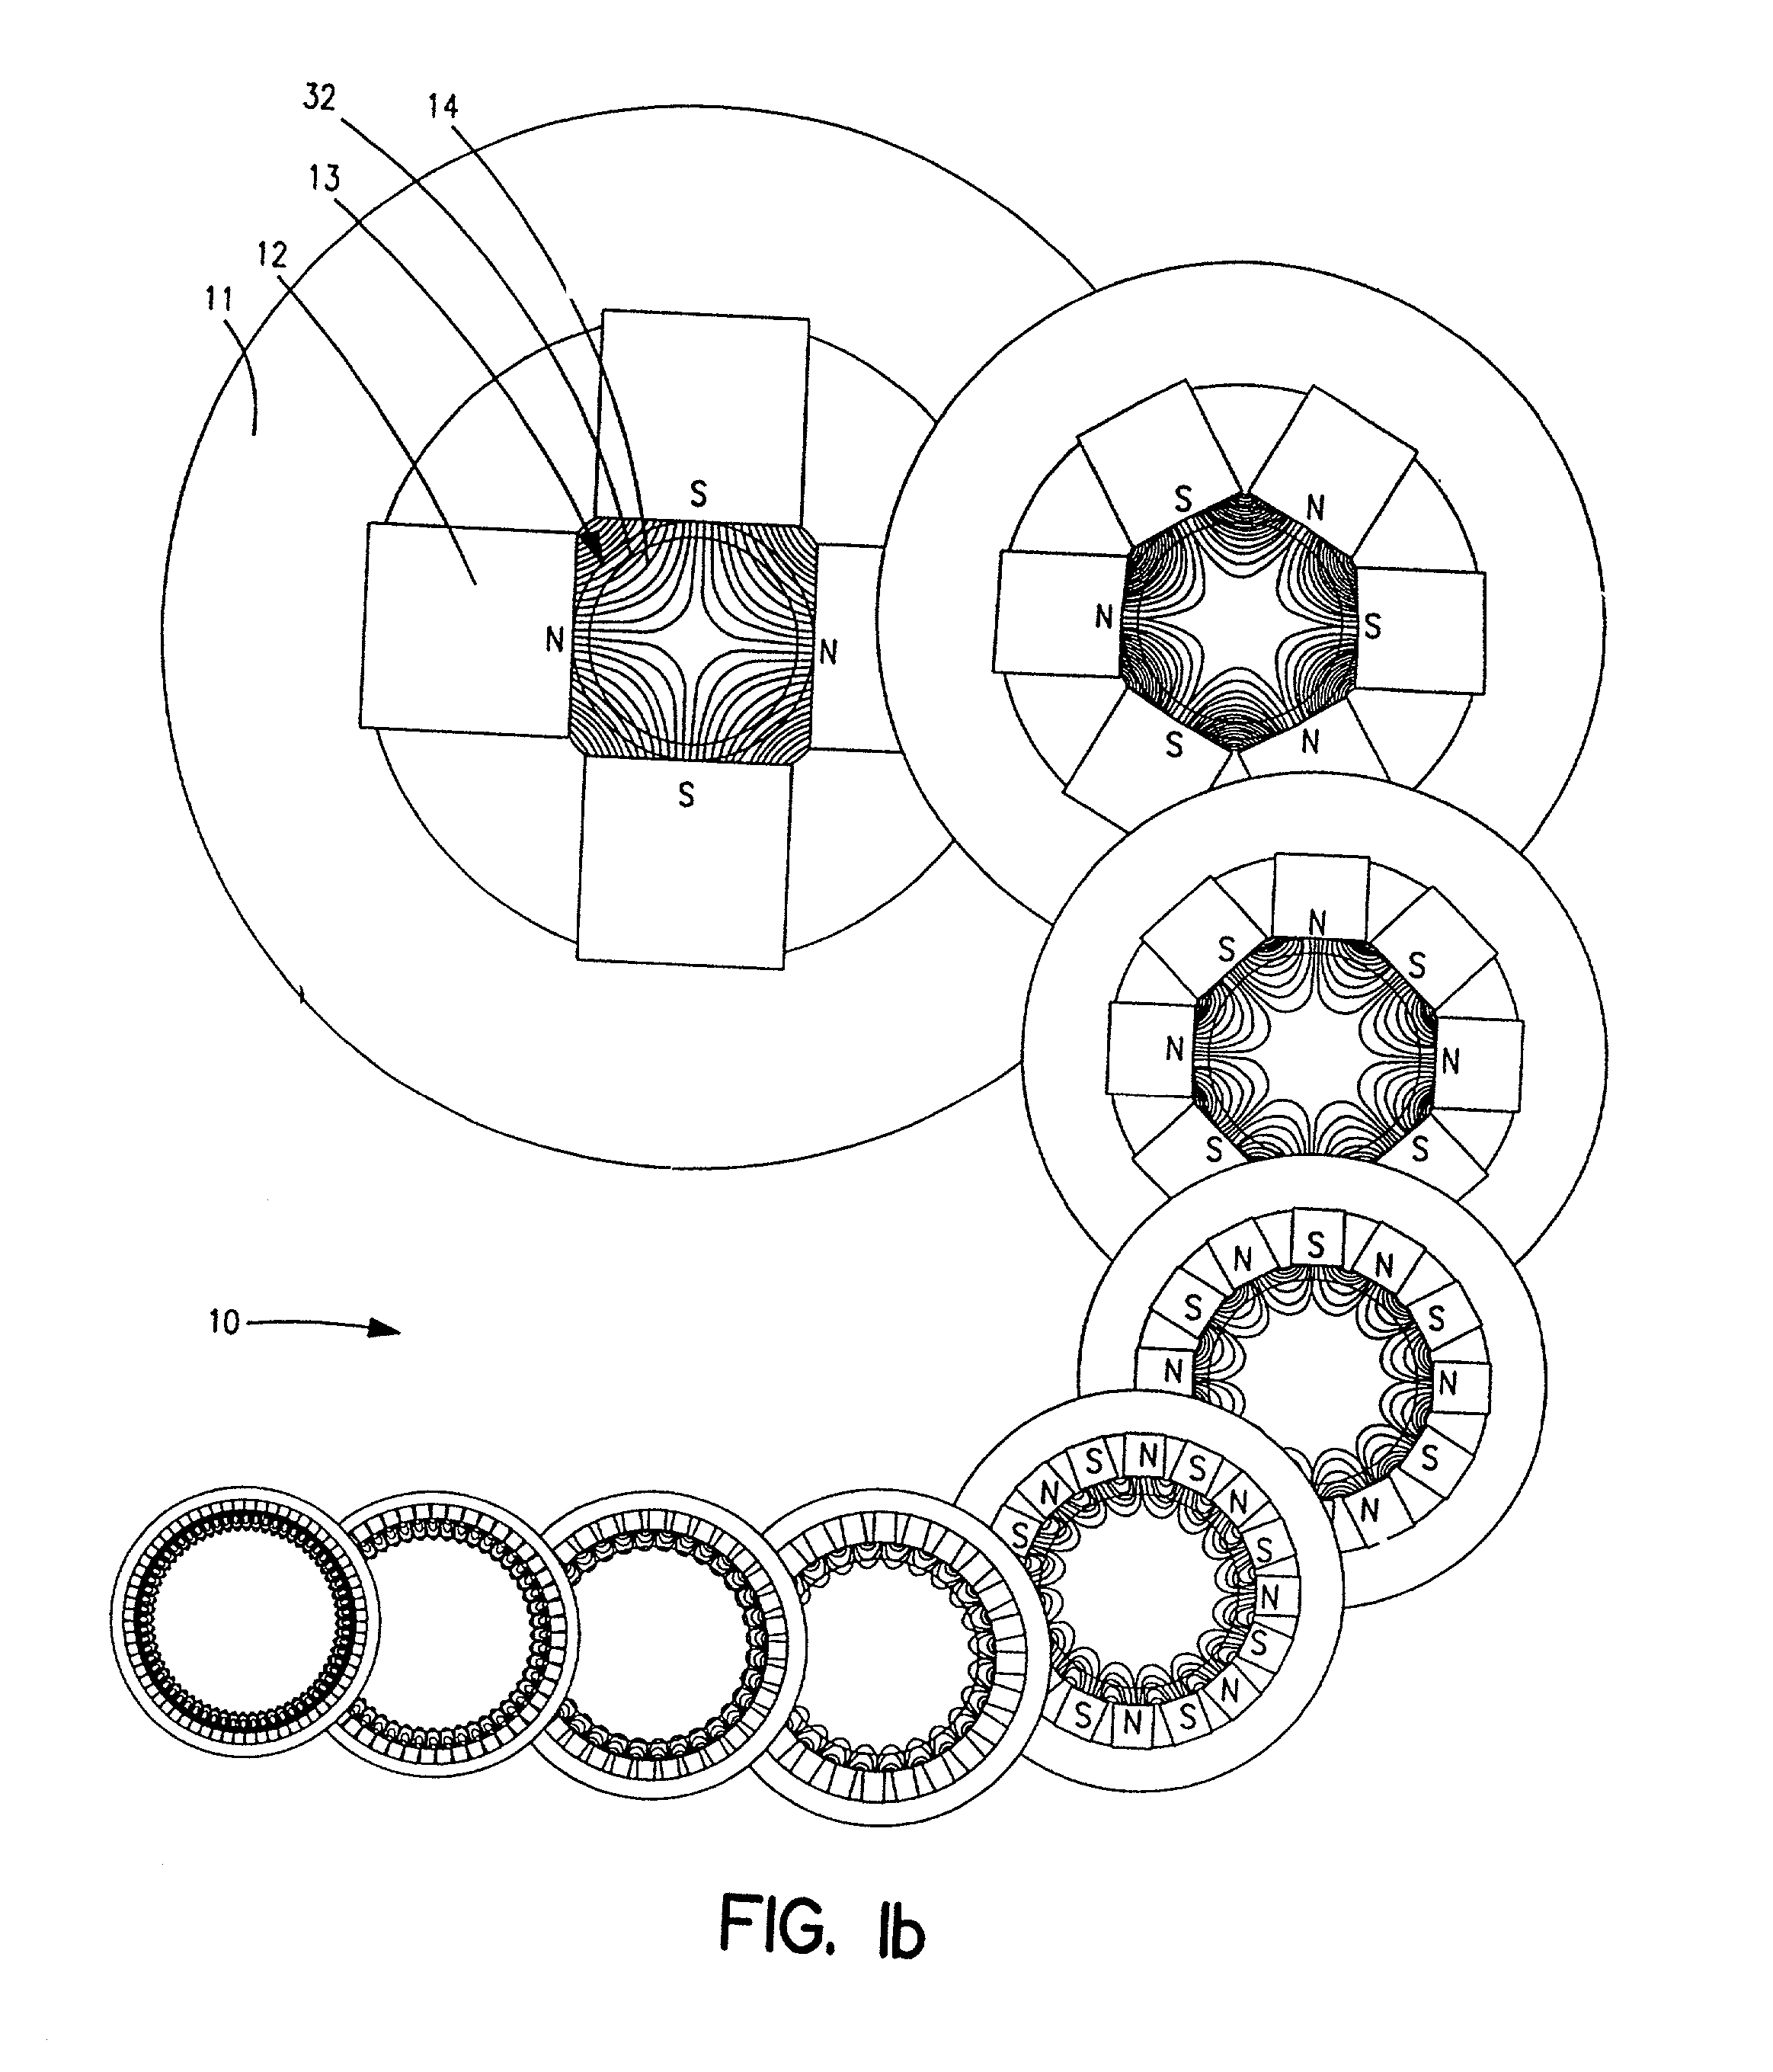 Apparatus and methods for magnetic separation